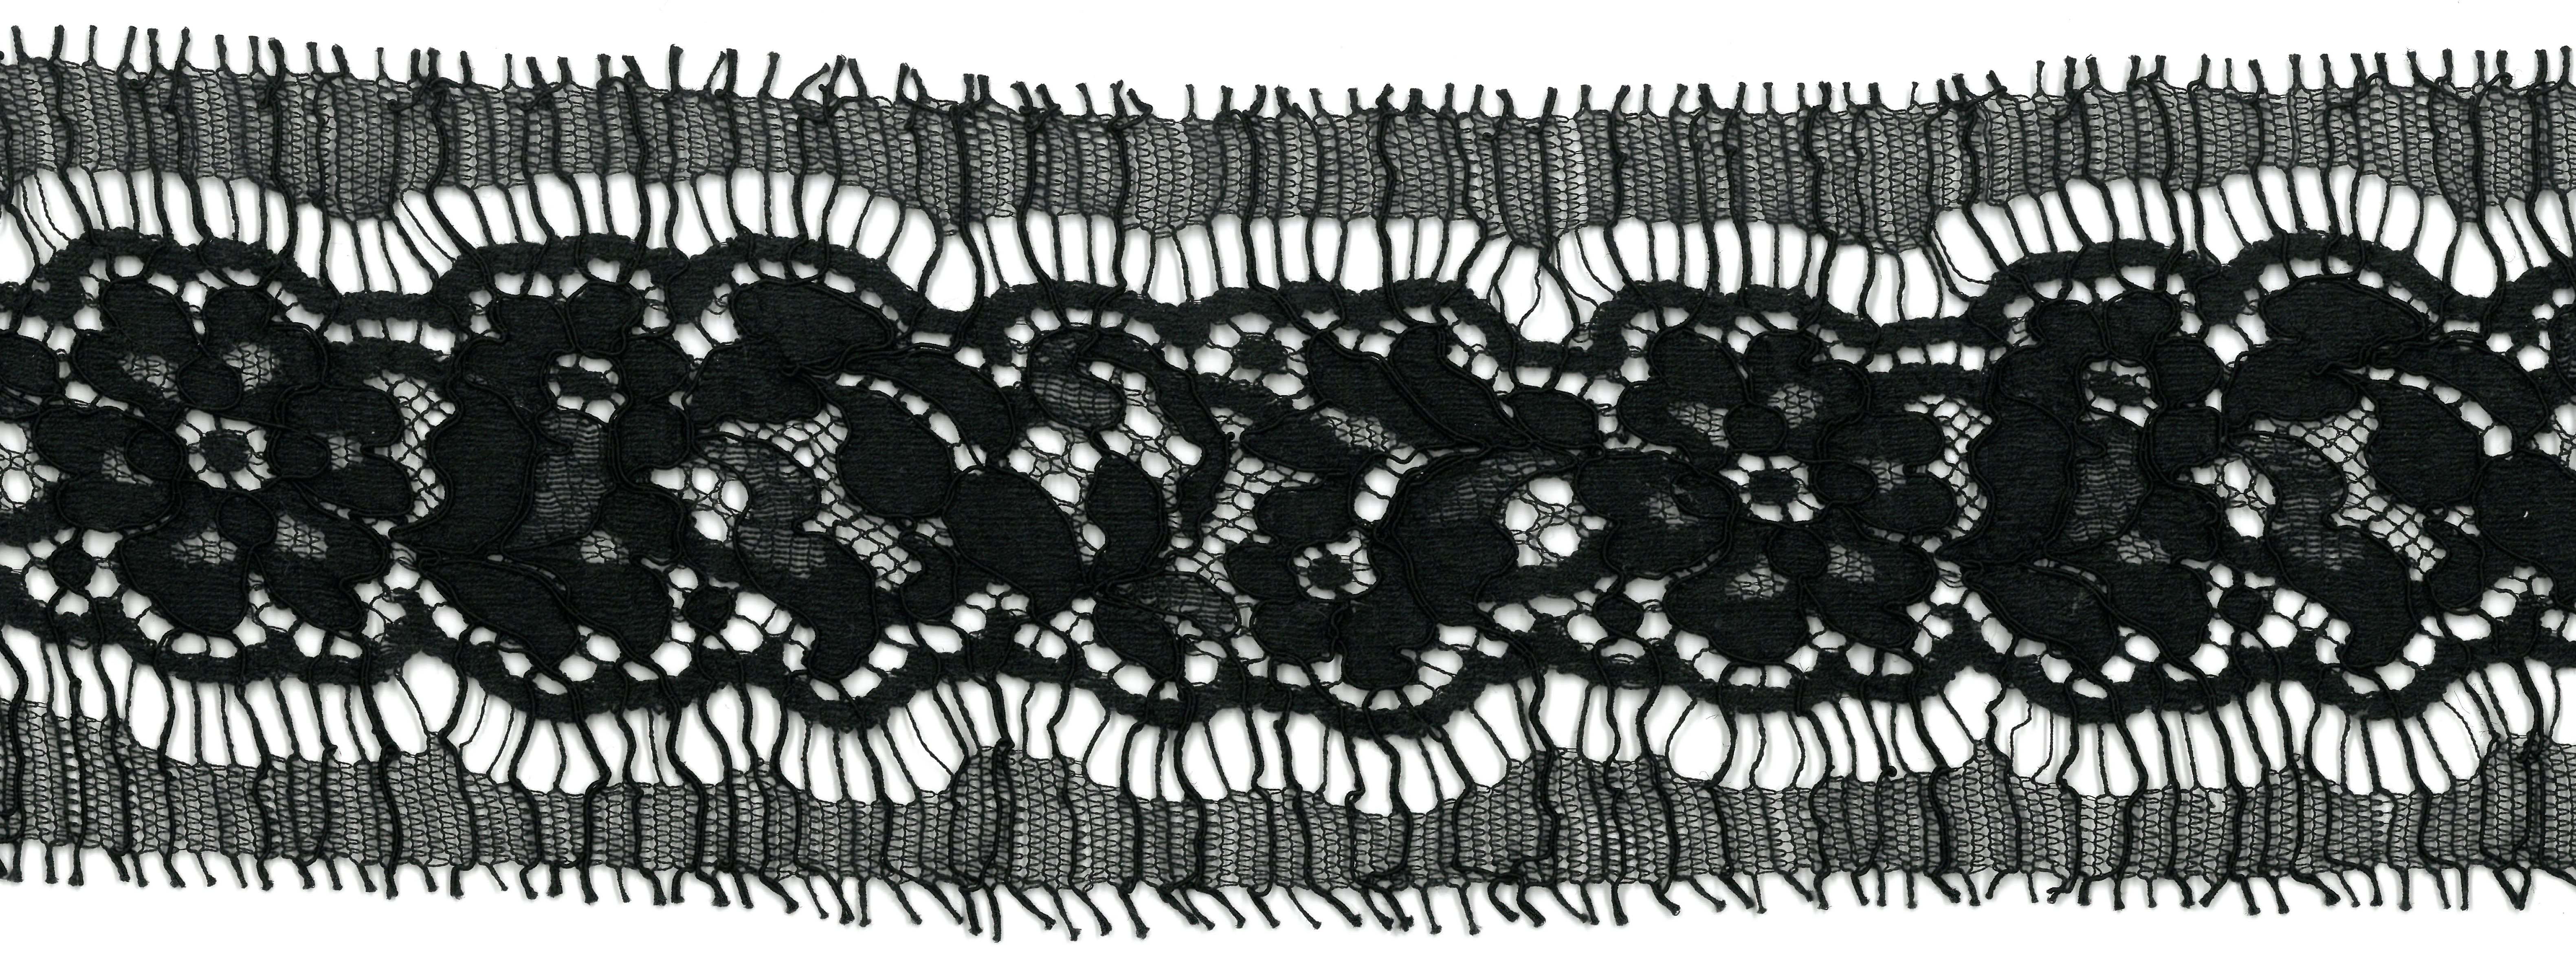 FRENCH LACE EDGING - BLACK